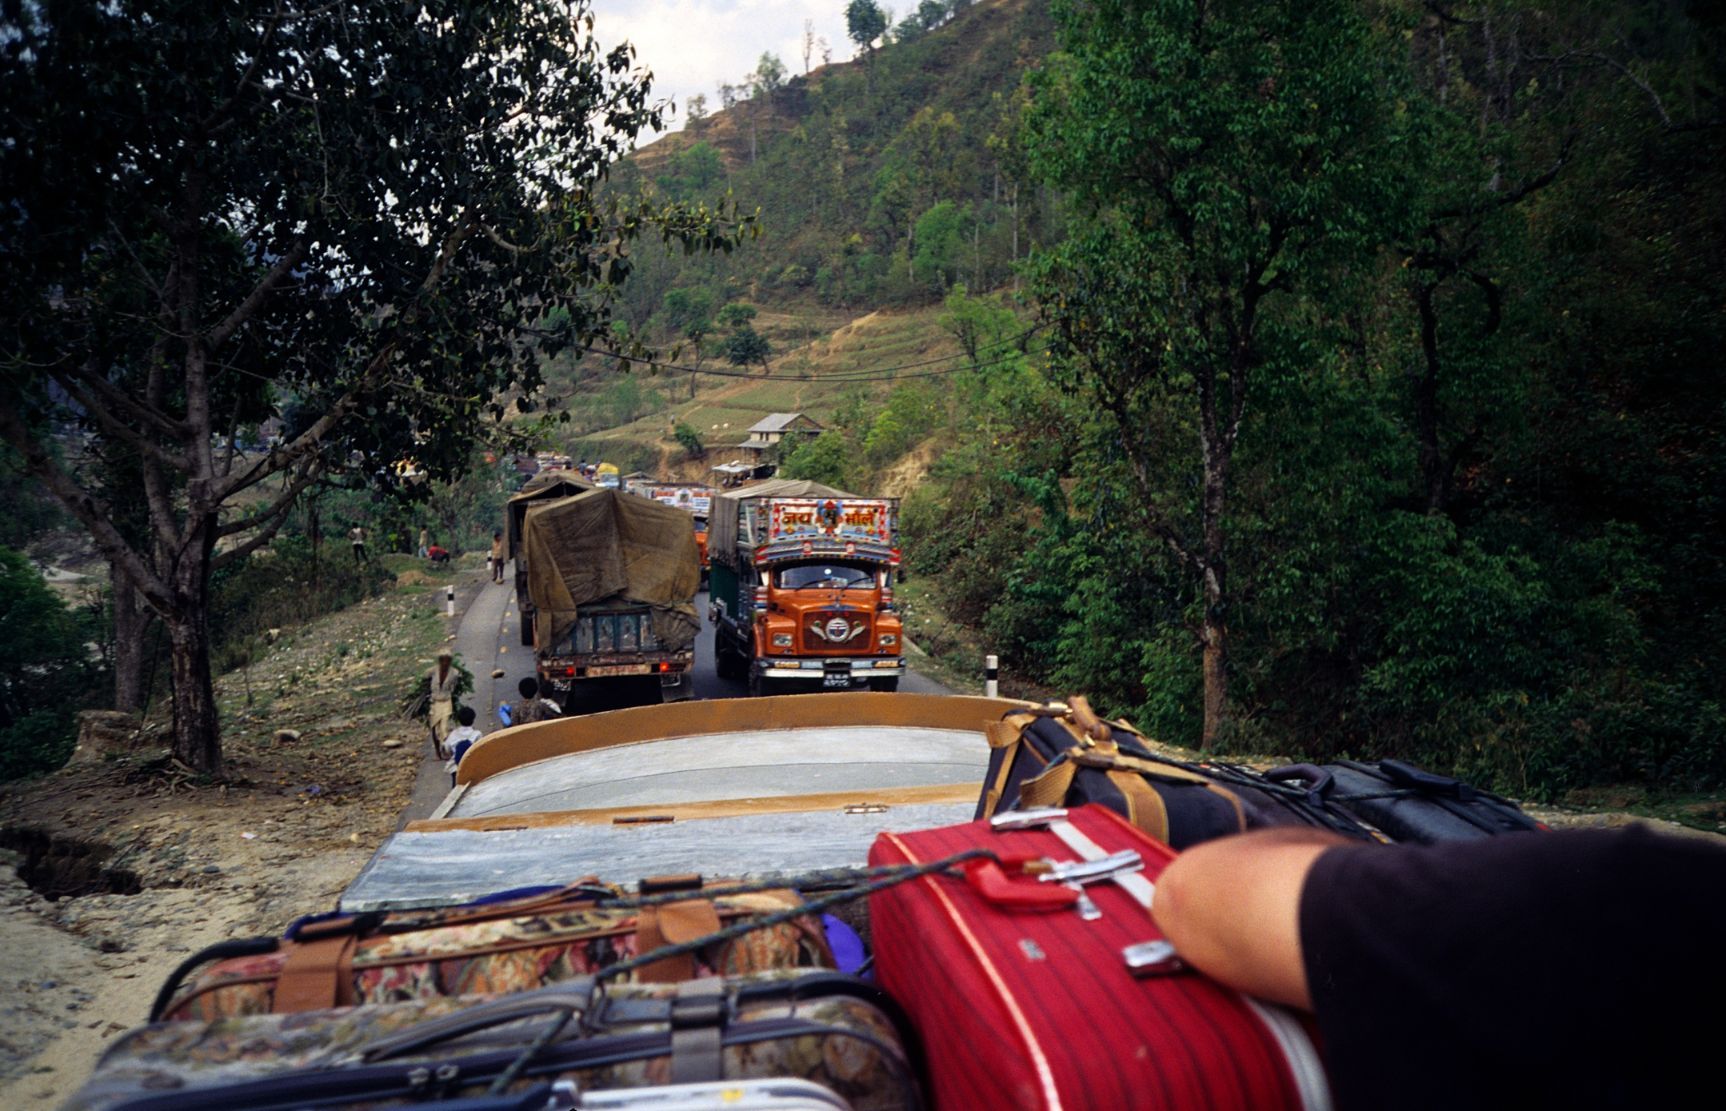 Close up of someone sitting on top of a bus filled with luggage, in Nepal - lorries on the road in the background.